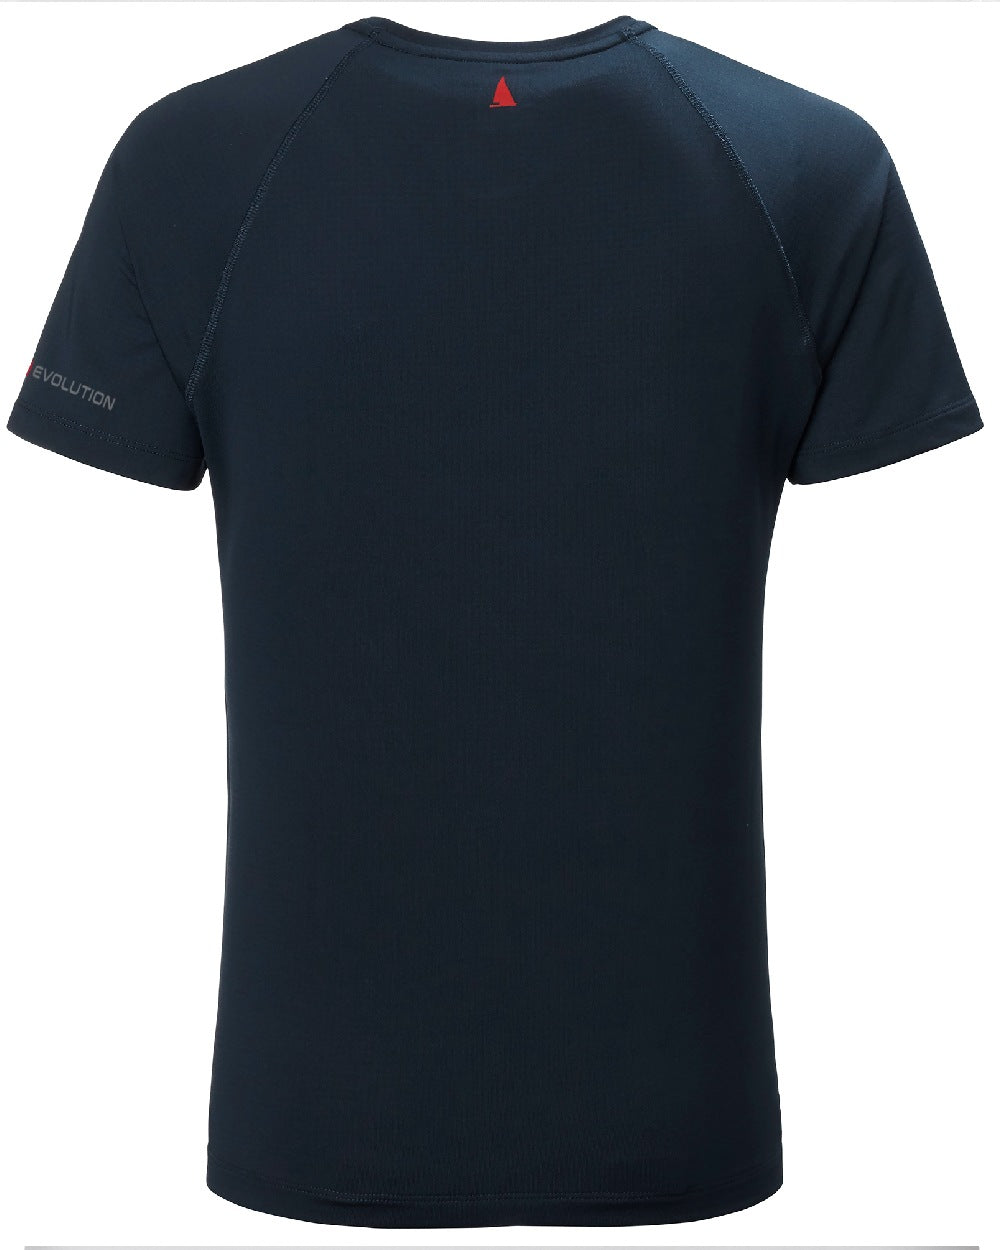 True Navy Coloured Musto Womens Evolution Sunblock Short Sleeve T-Shirt On A White Background 